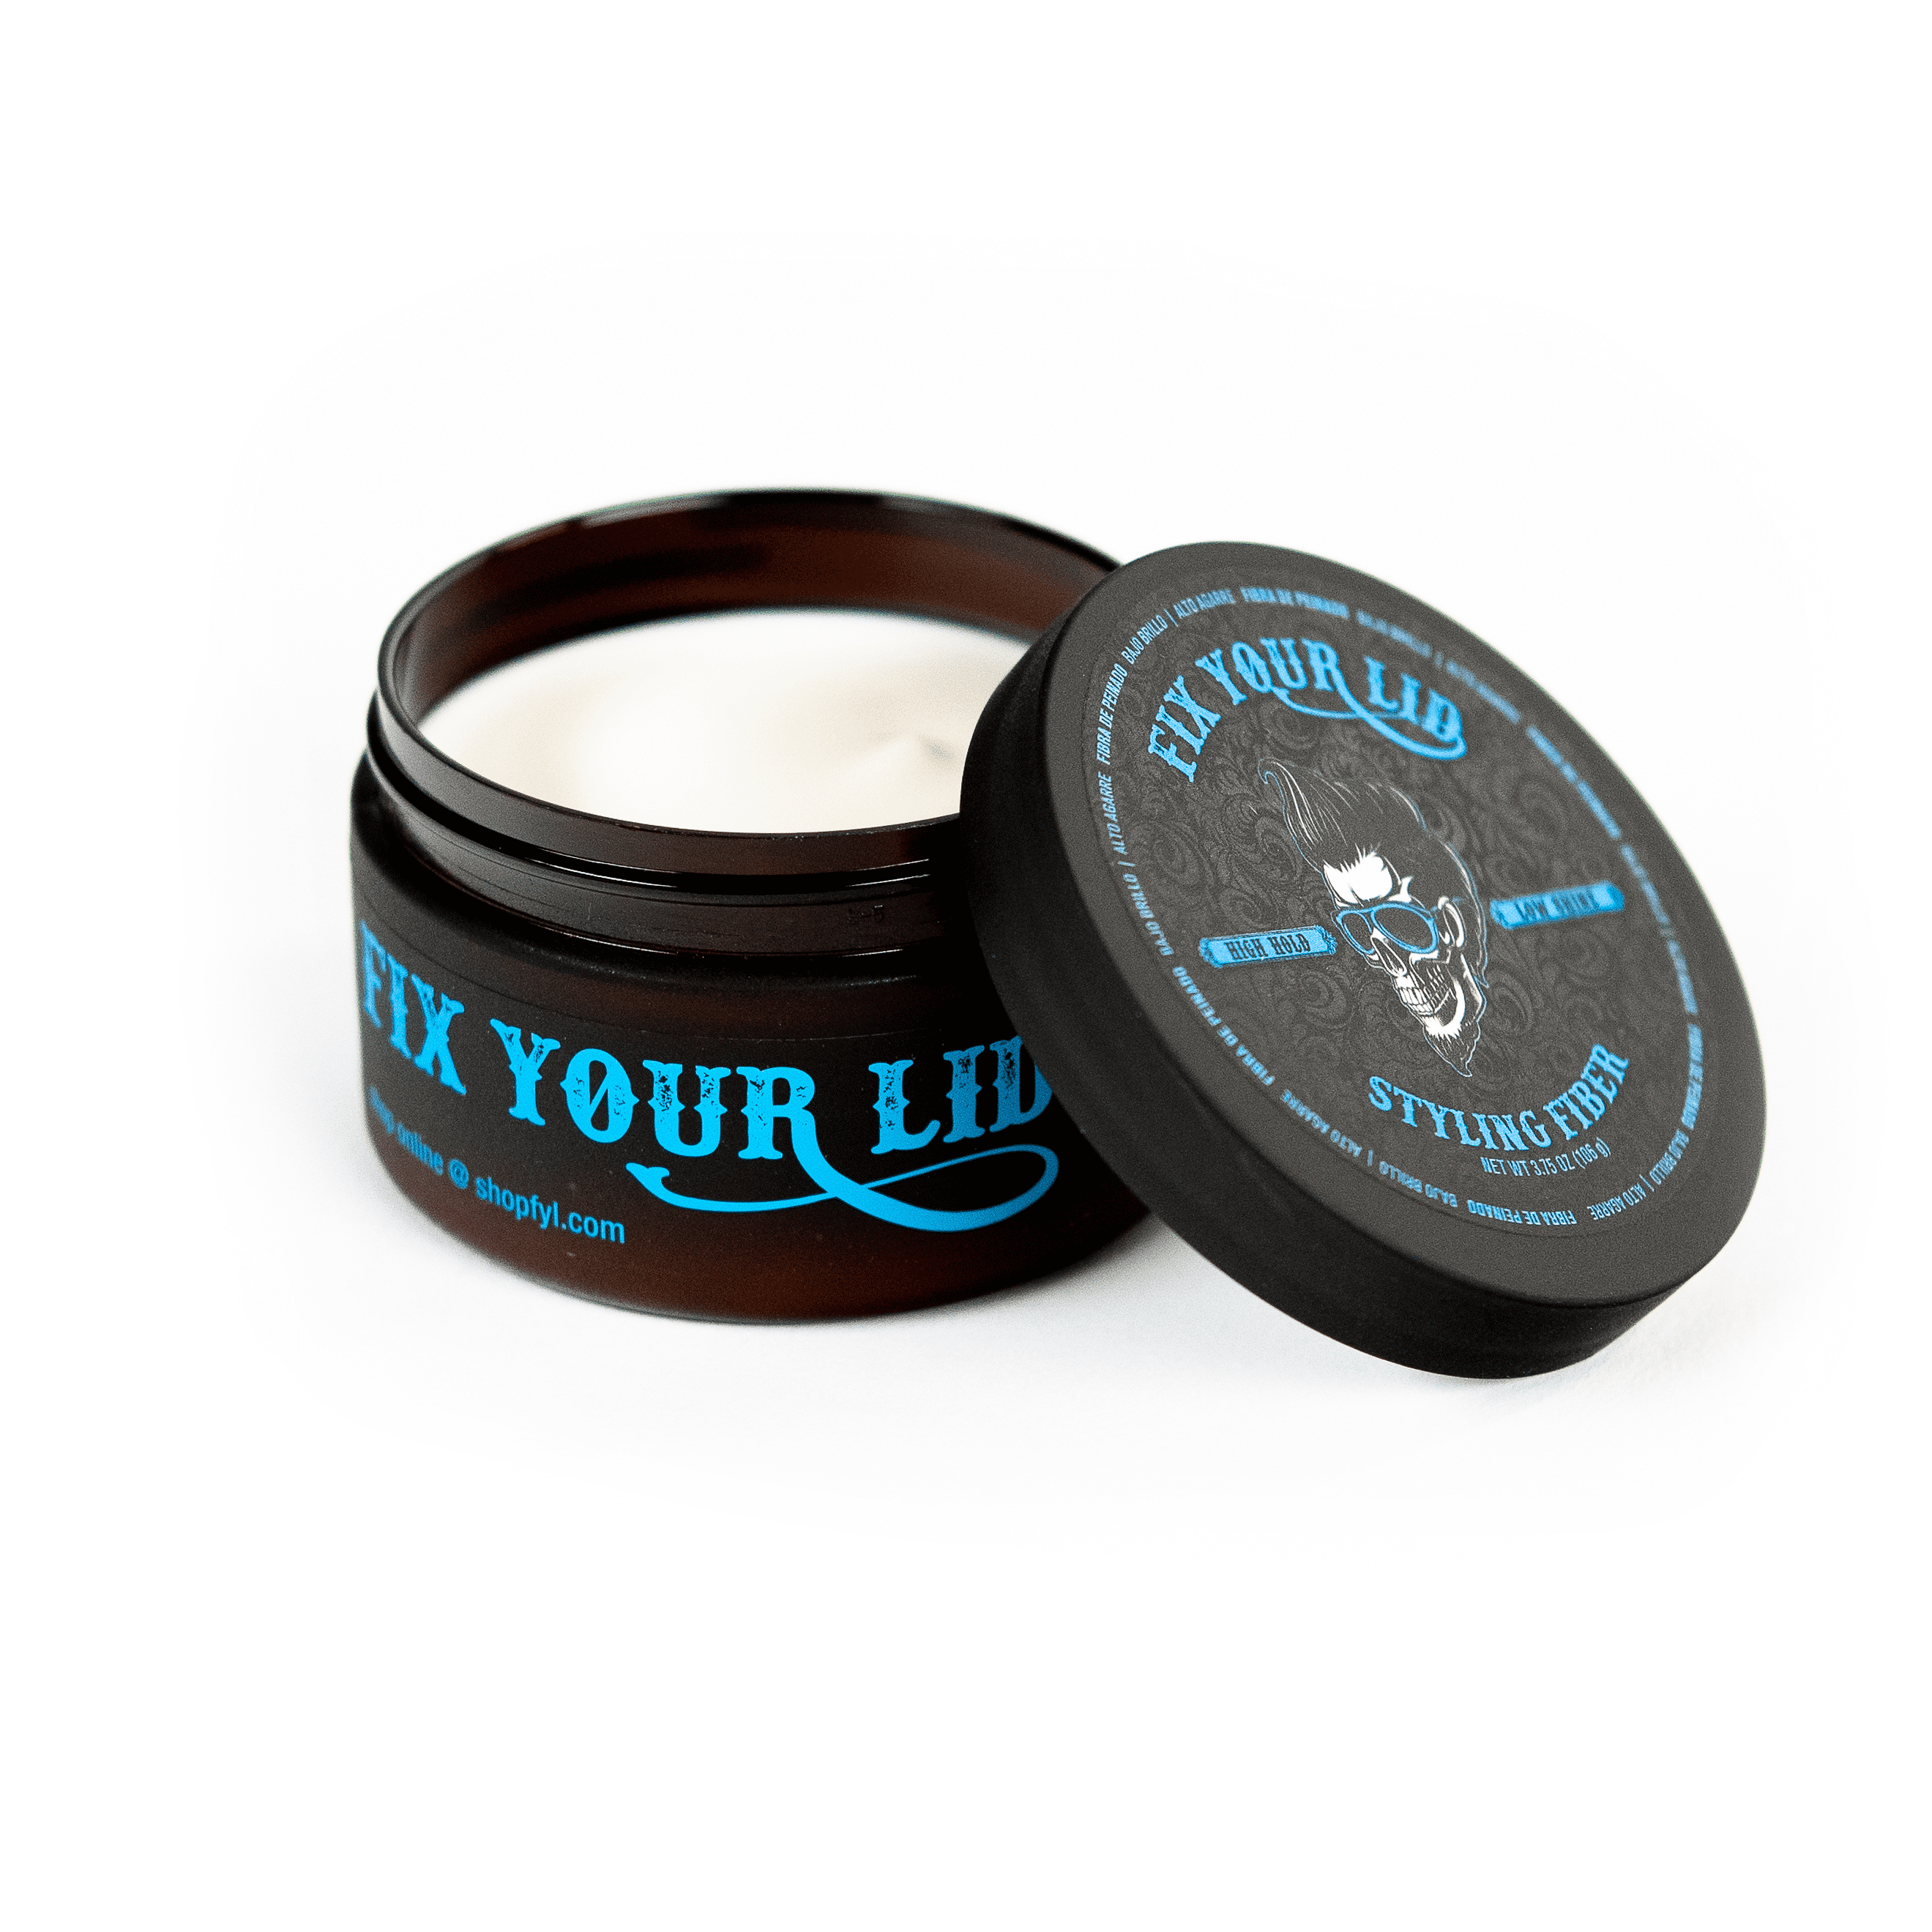 Flex your new fix with Fix Your Lid #fixyourlid